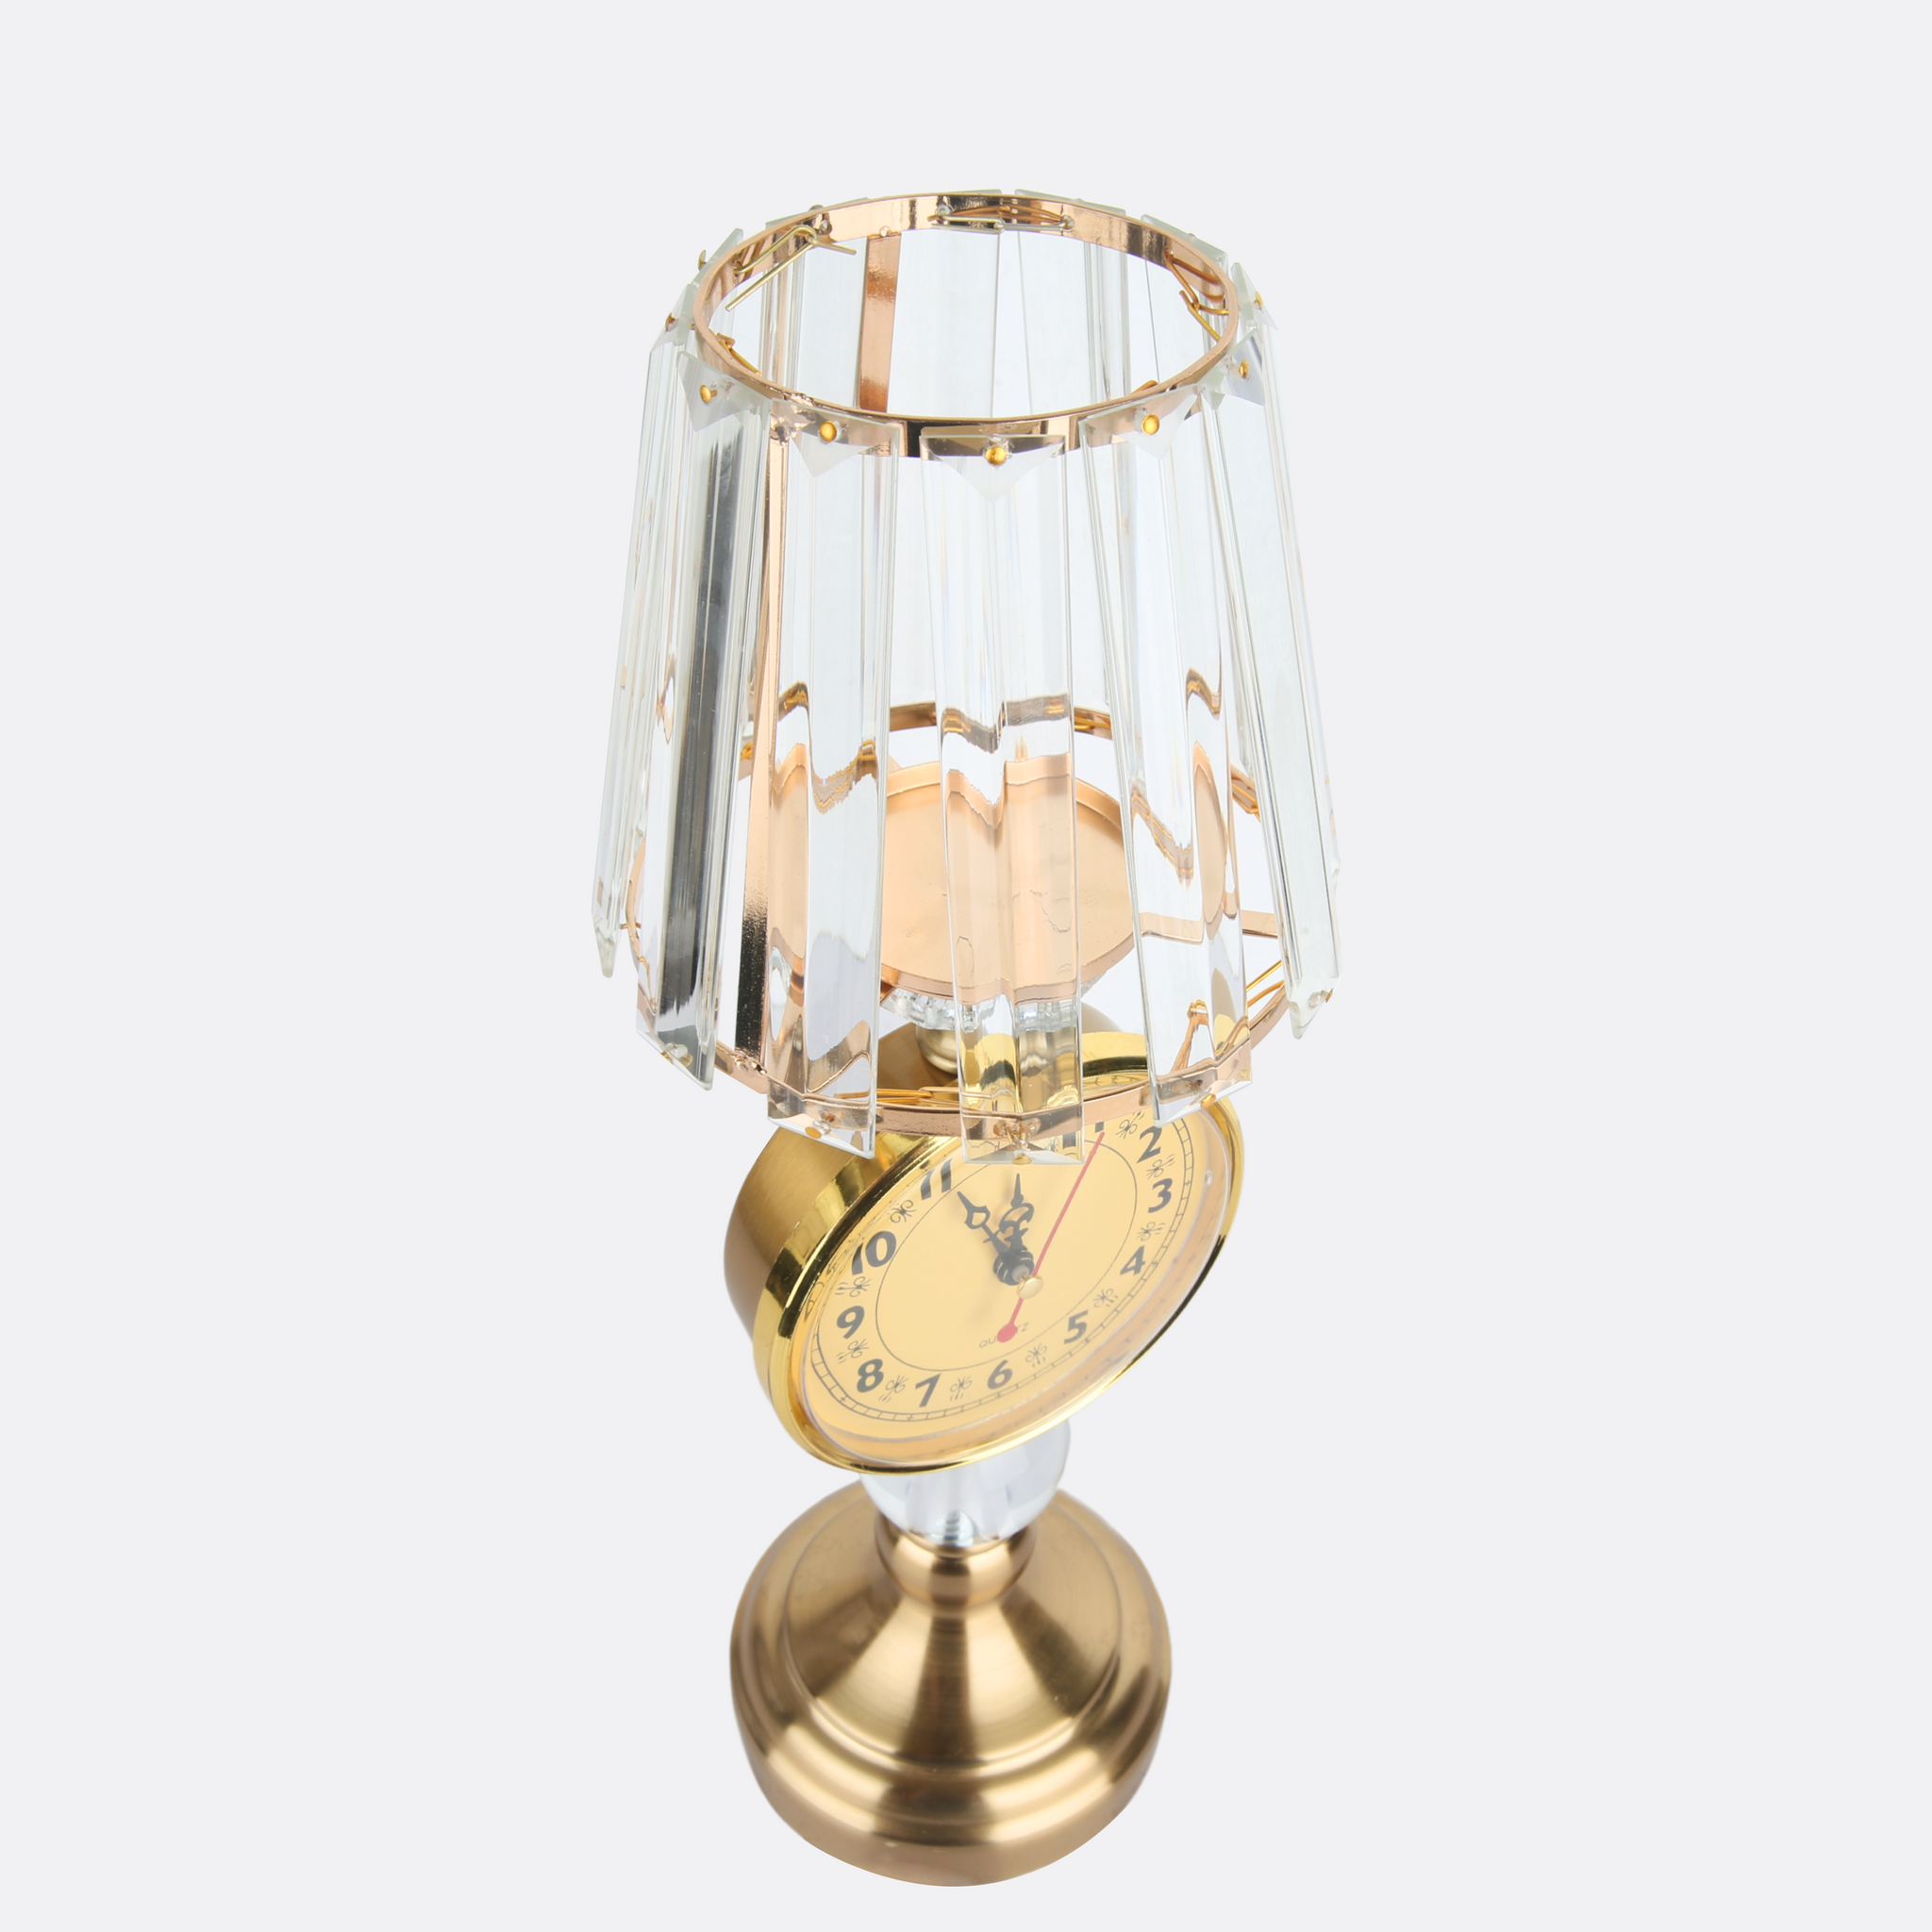 Candle Holder With Clock